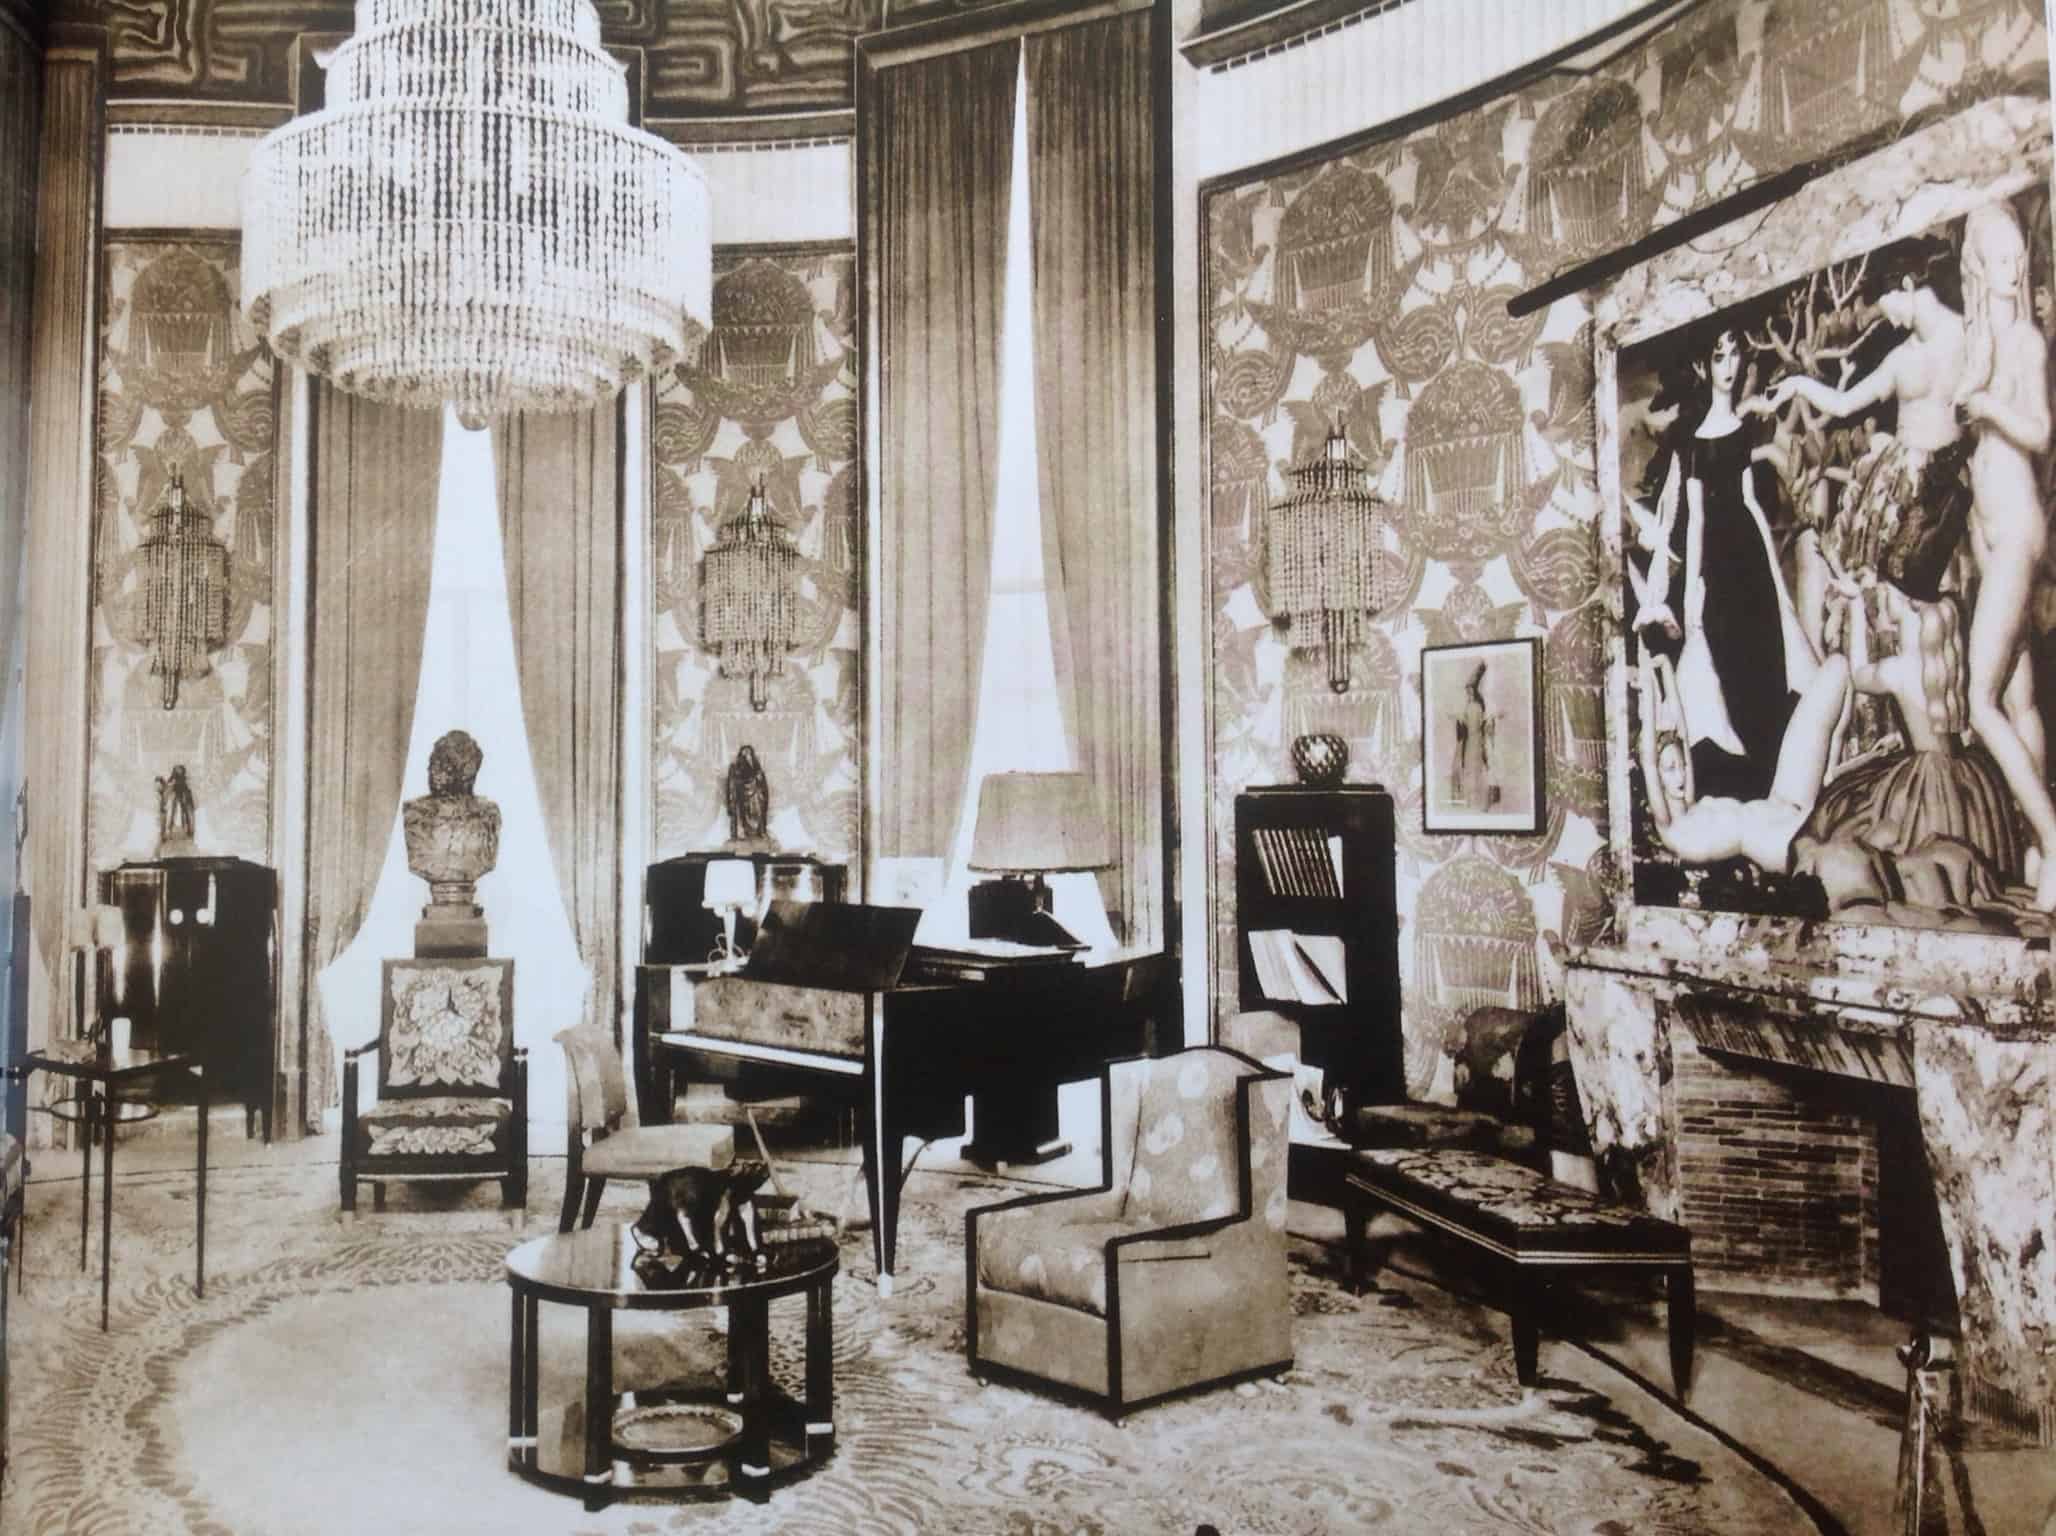 02 The Salon Of The Hotel Du Collectionneur At The 1925 Paris International Exposition Of Decoratiive Arts Designed By Emile Jacques Ruhlmann 1879 1933 